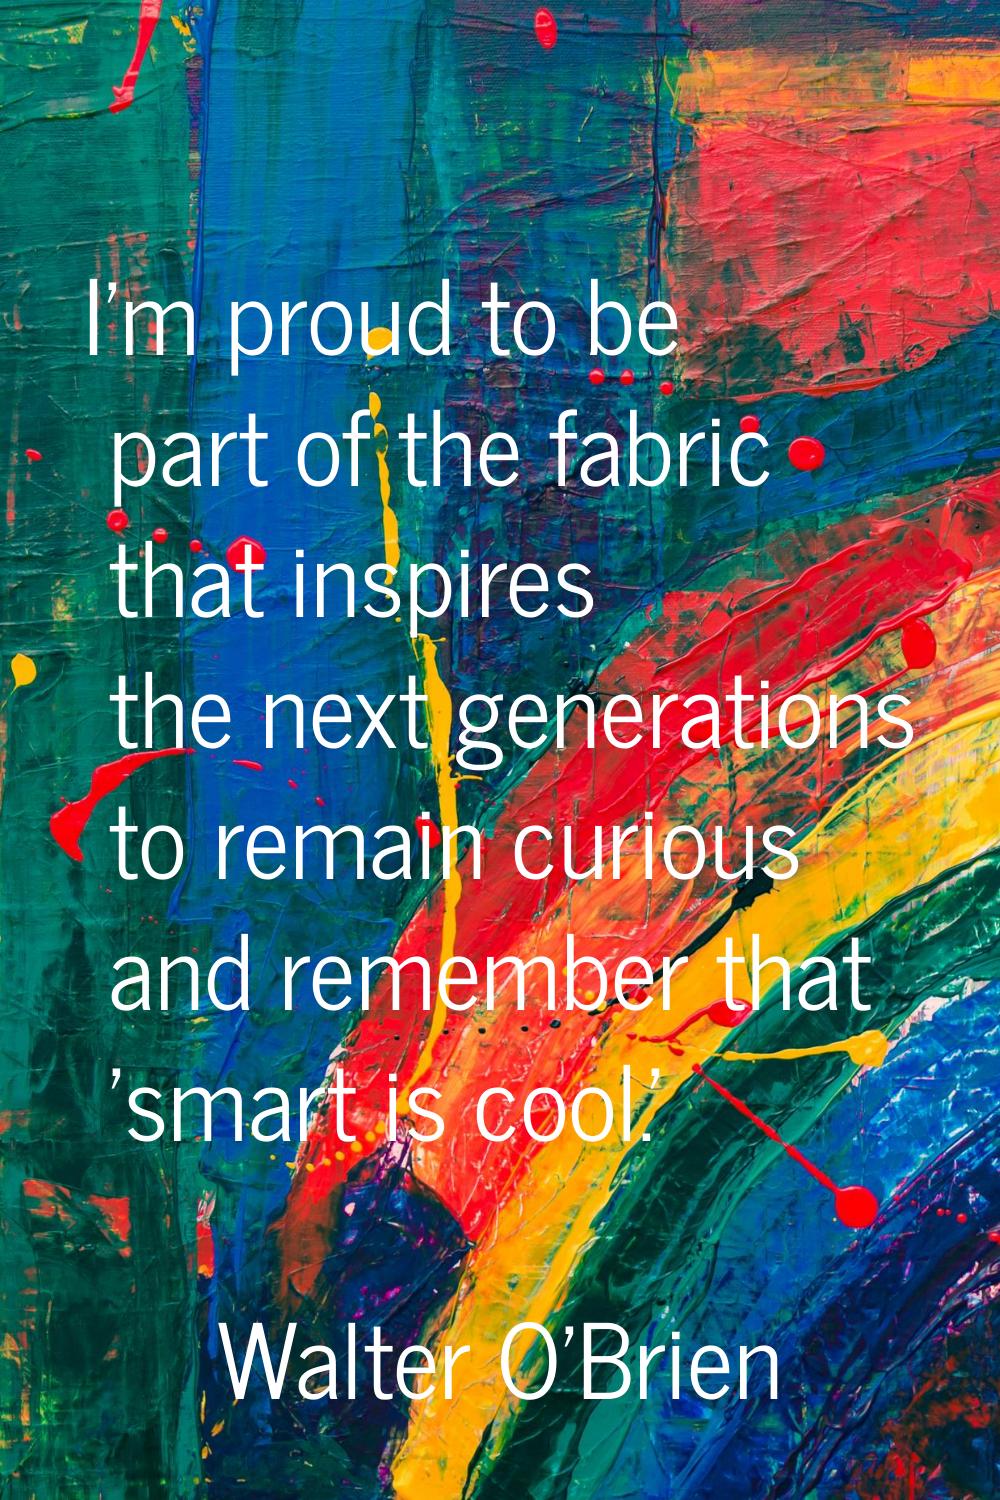 I'm proud to be part of the fabric that inspires the next generations to remain curious and remembe